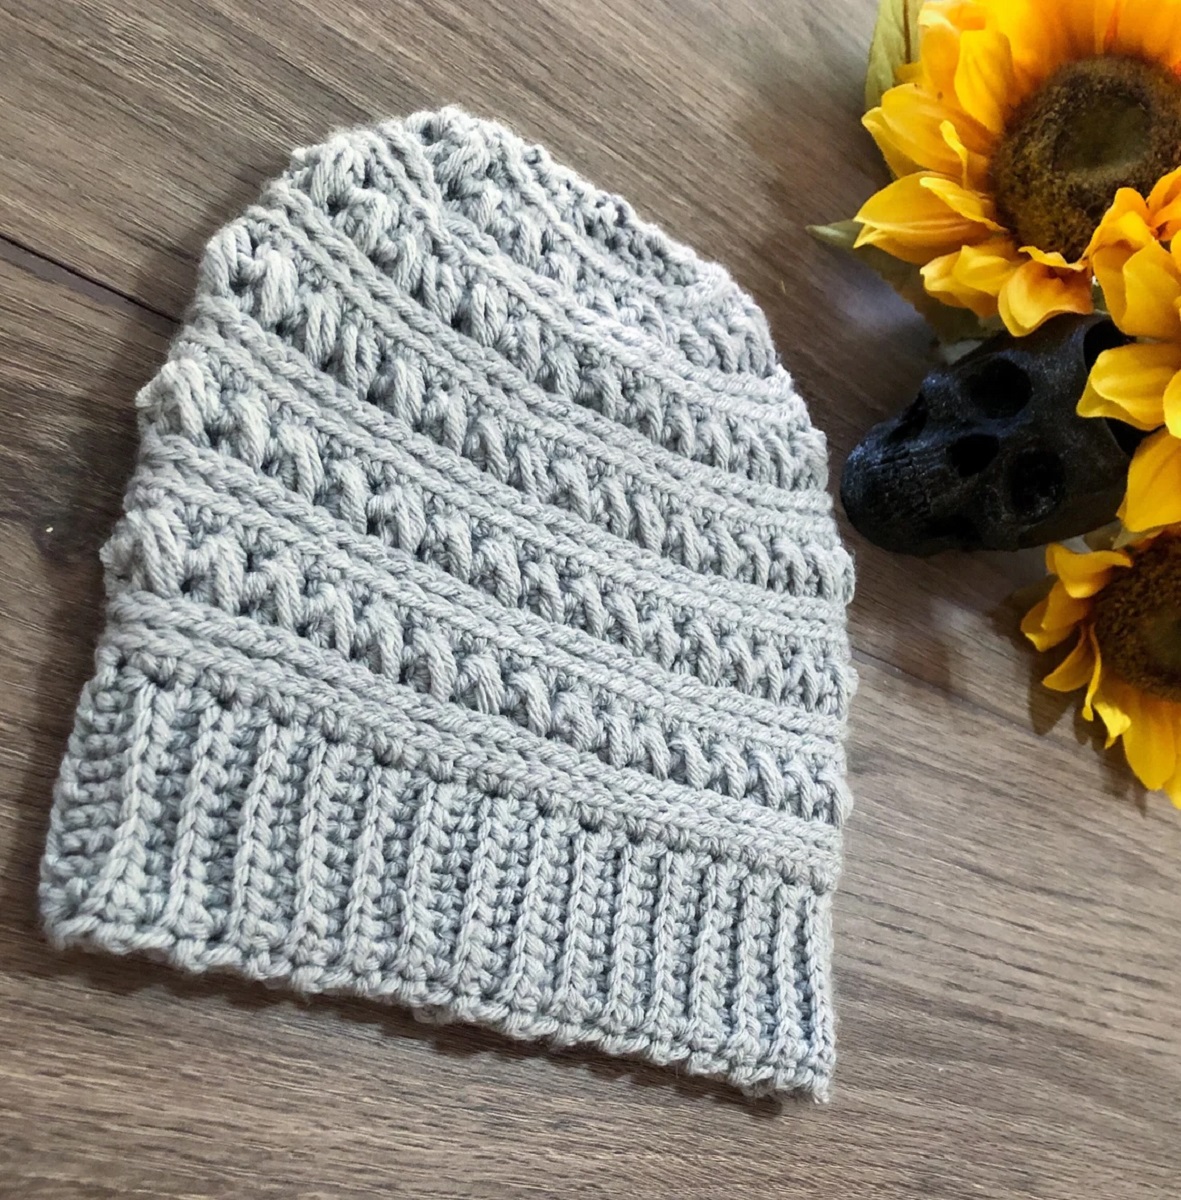 A light green crochet beanie hat with a thick banding around the bottom next to some sunflowers on a wooden table.